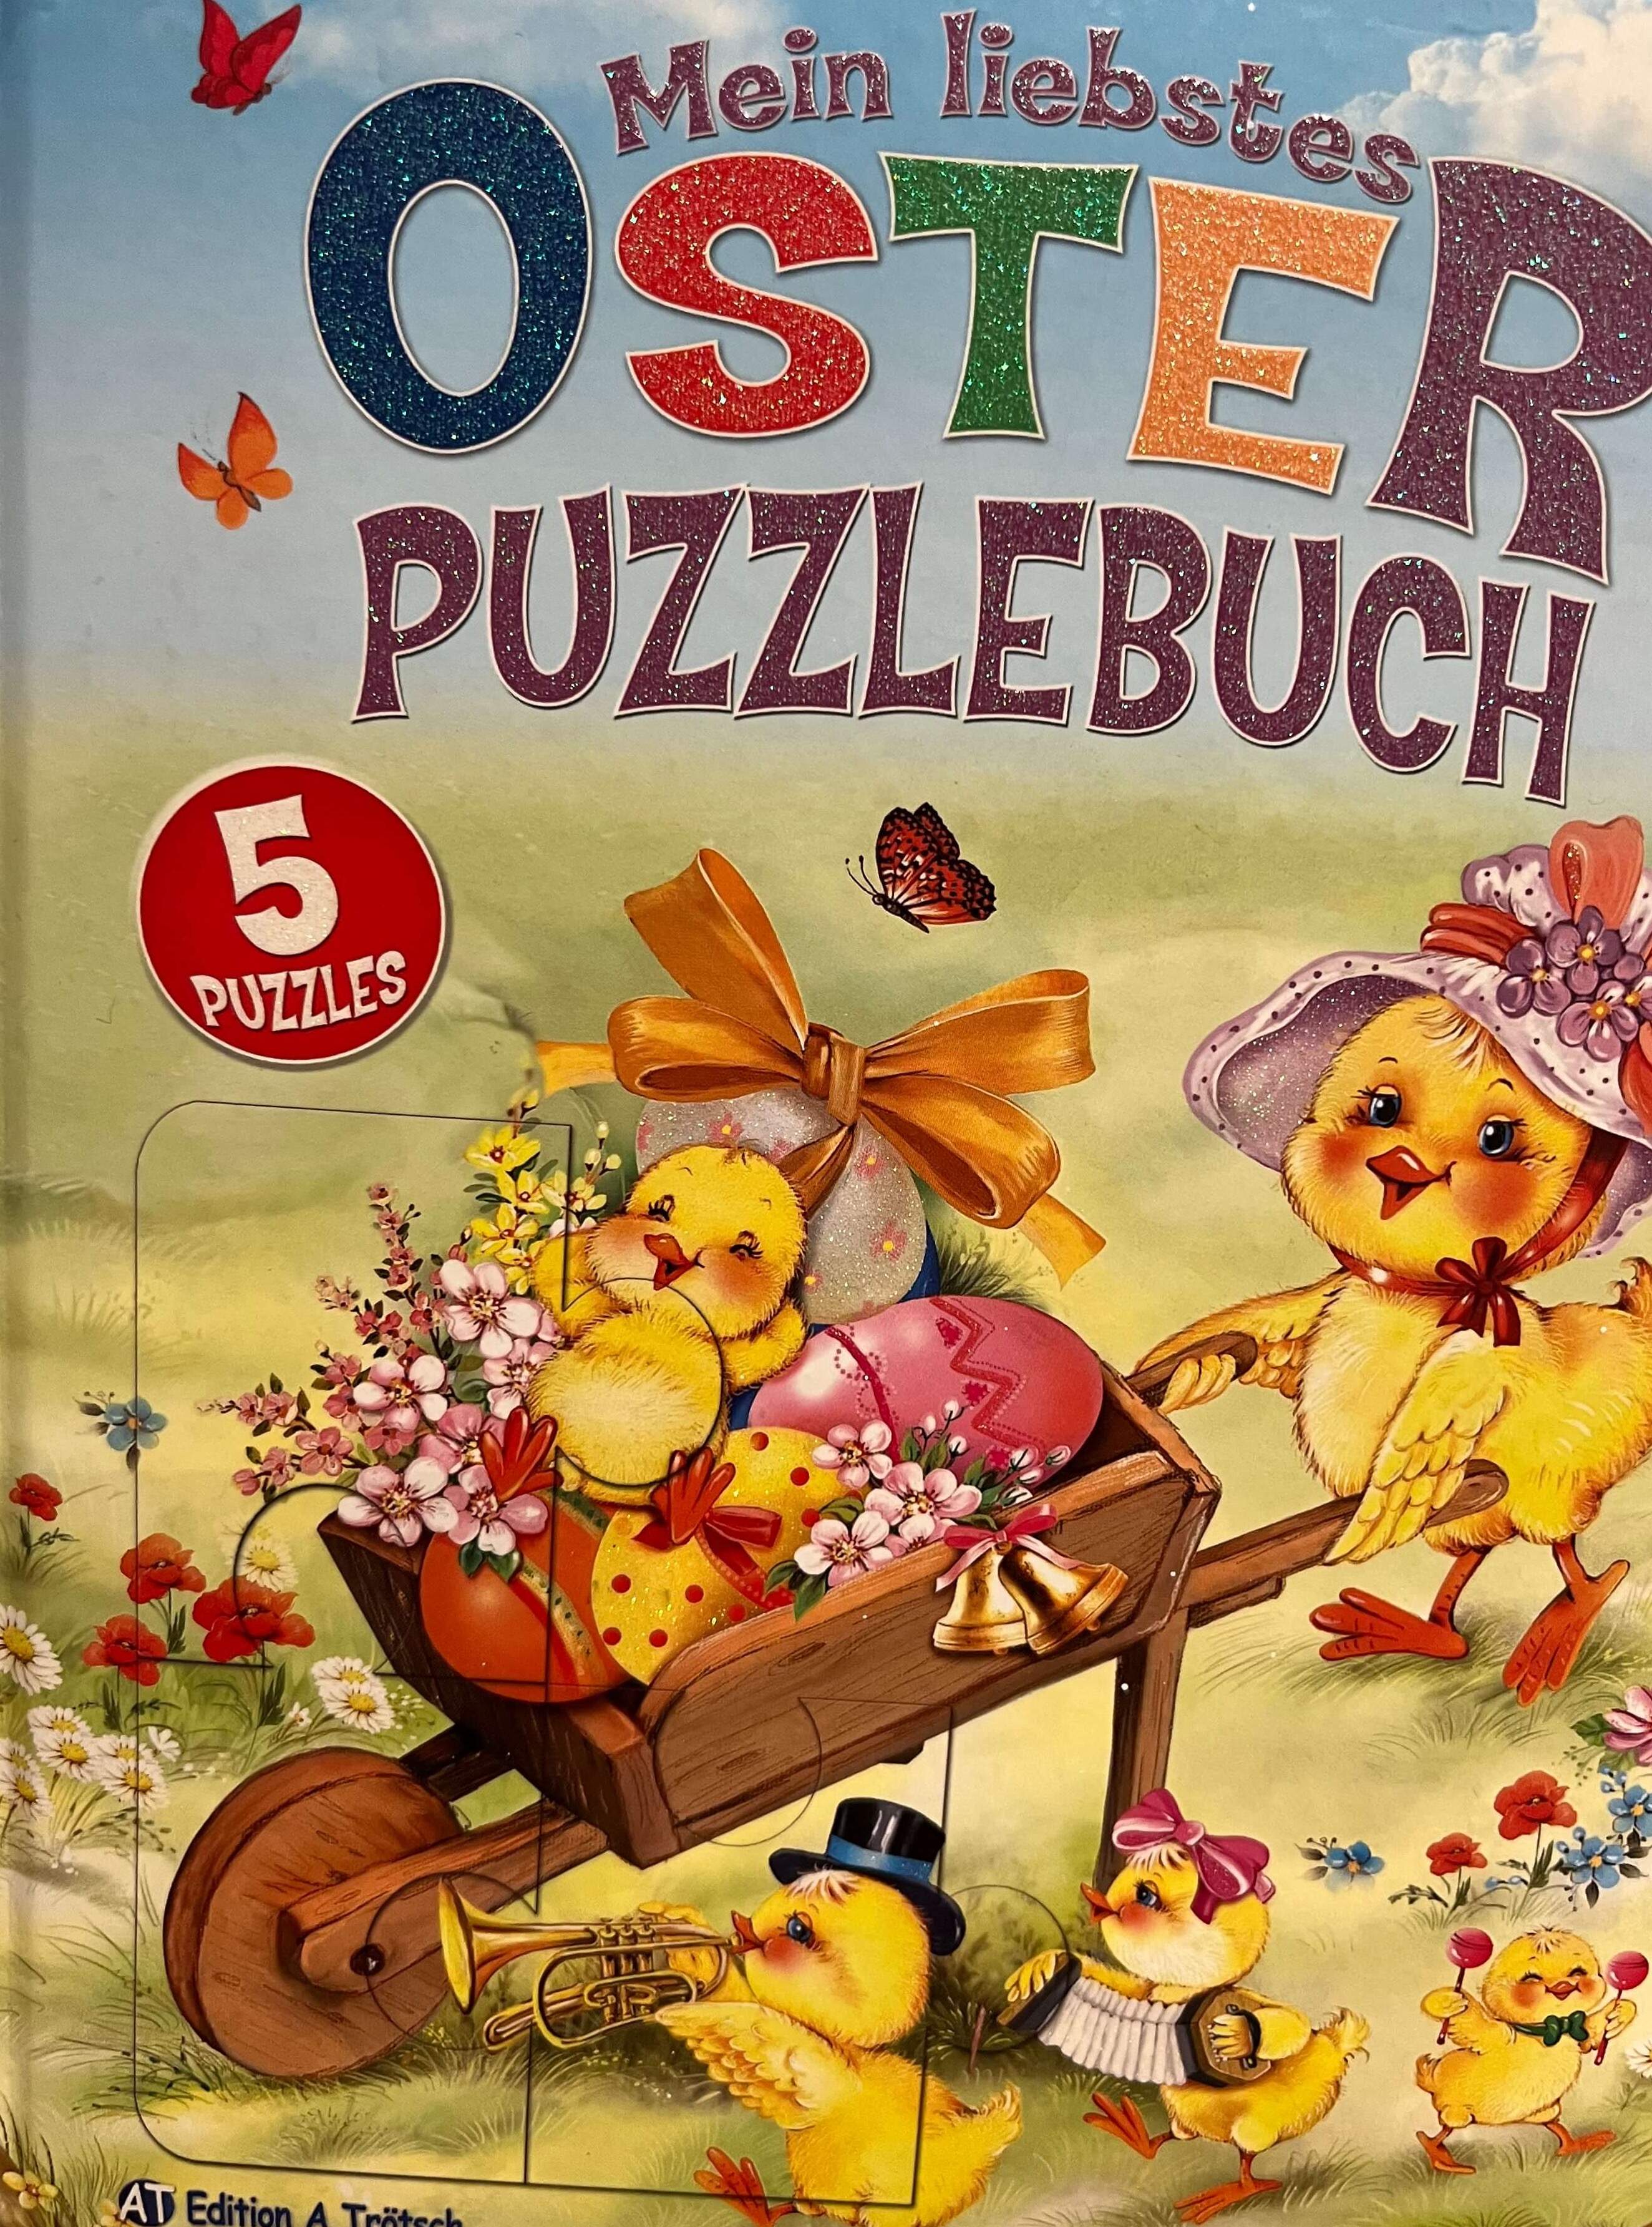 Mein liebstes Oster Puzzlebuch - 5 Puzzles